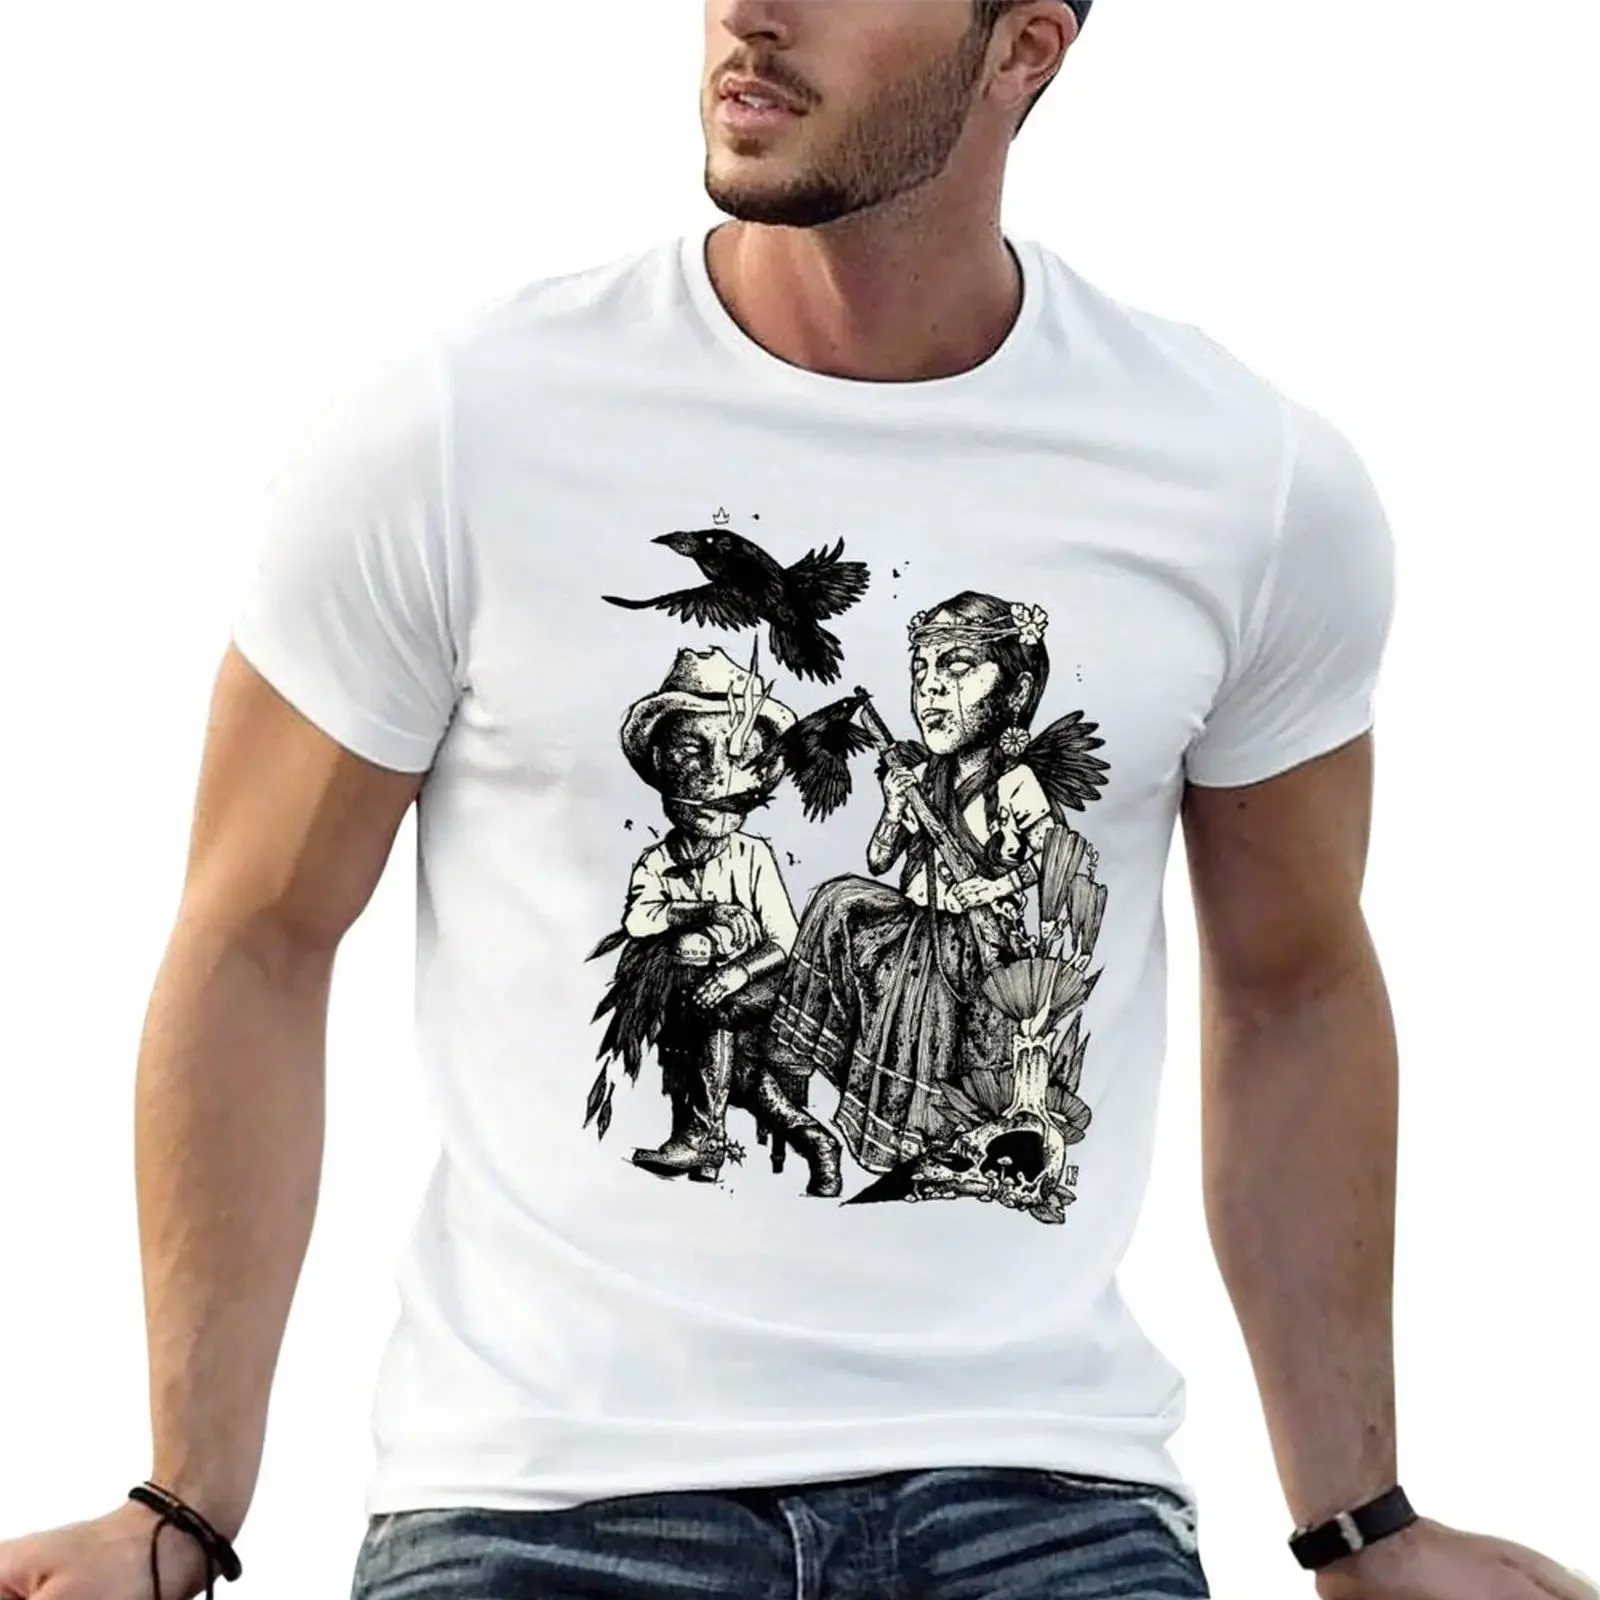 

The Queen of the Ravens. T-Shirt plus sizes customizeds slim fit t shirts for men